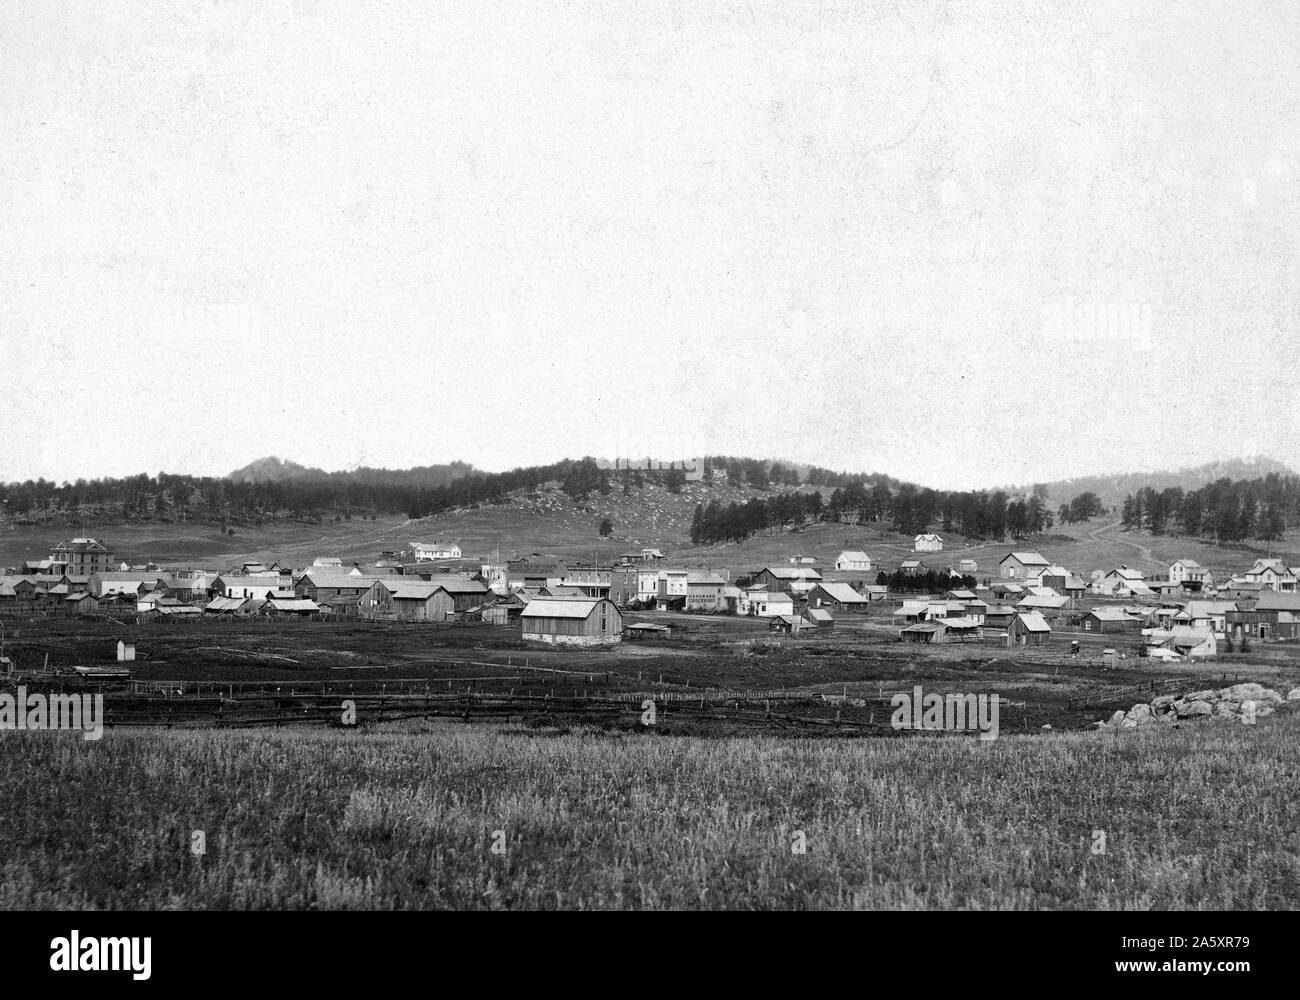 Distant view of small town; field in foreground and hills in background. Stock Photo